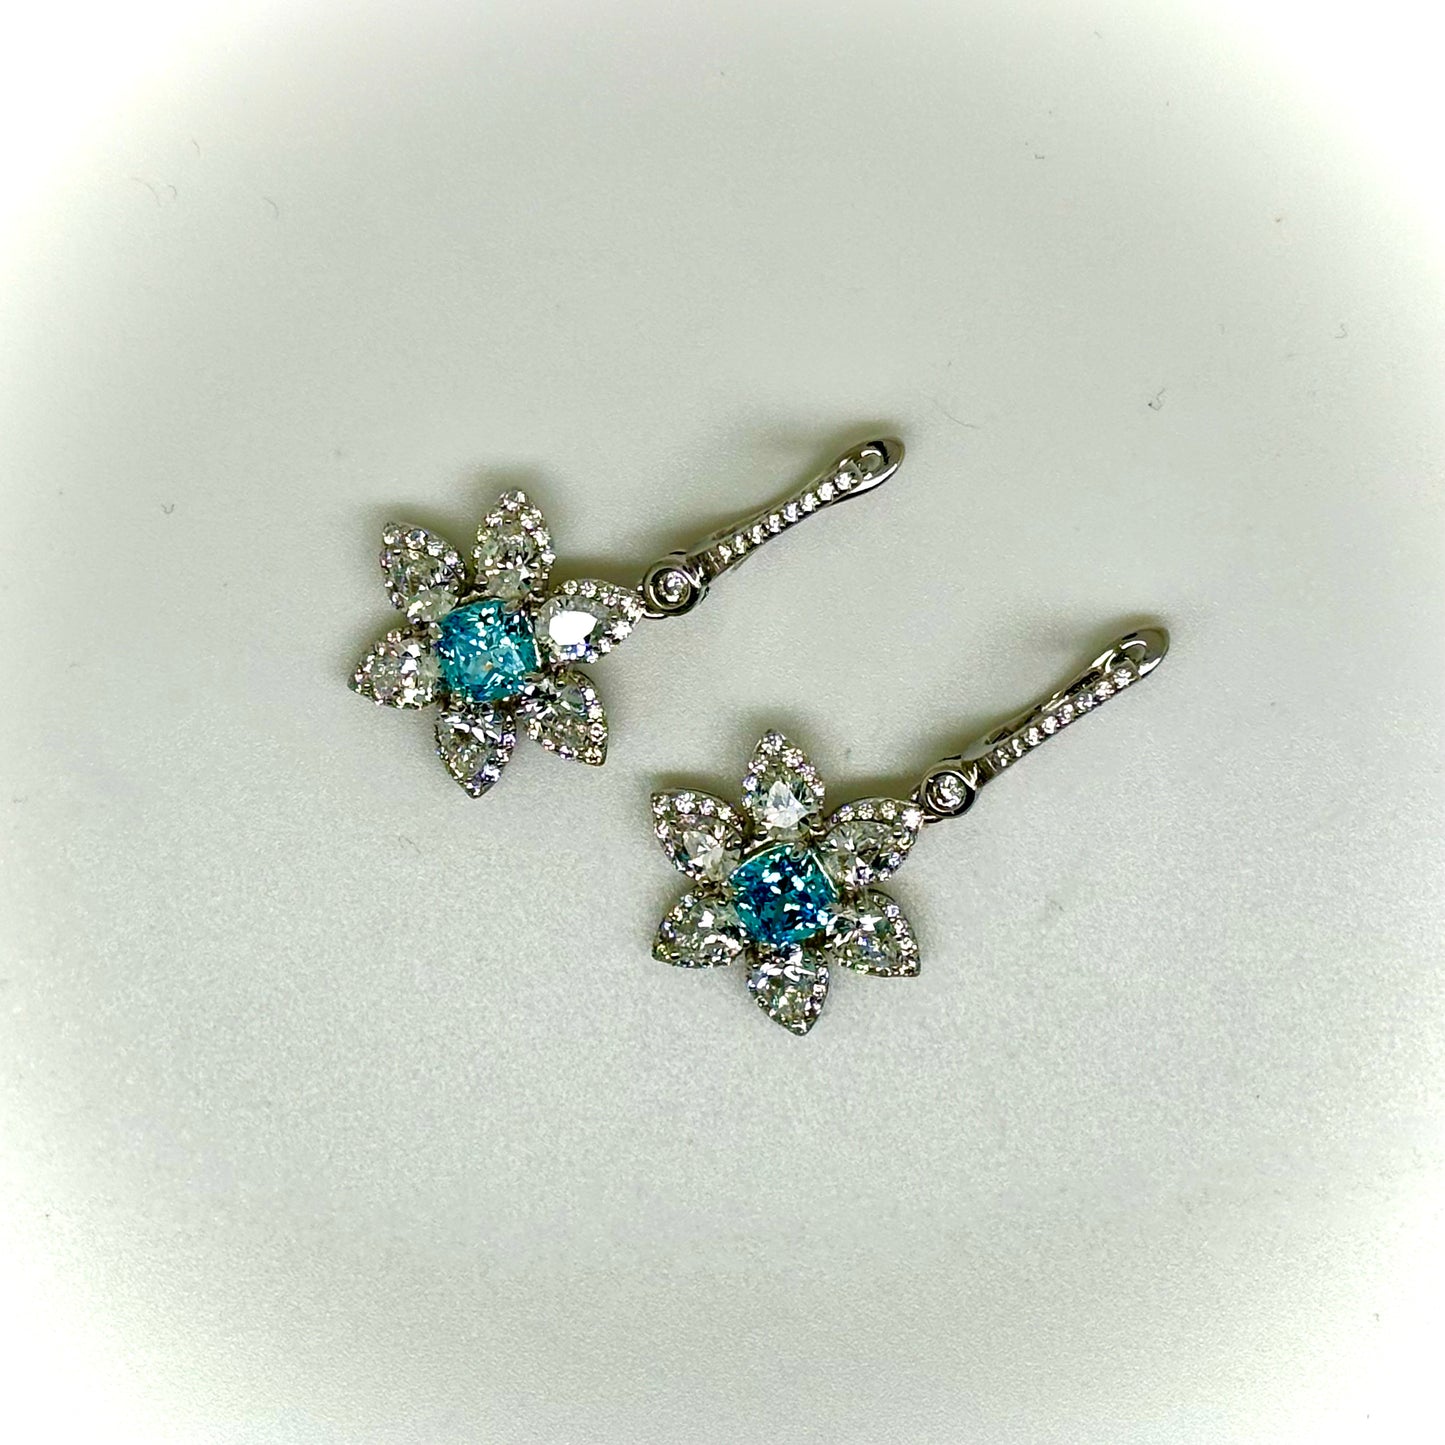 Blue and Clear CZ Flower Earrings